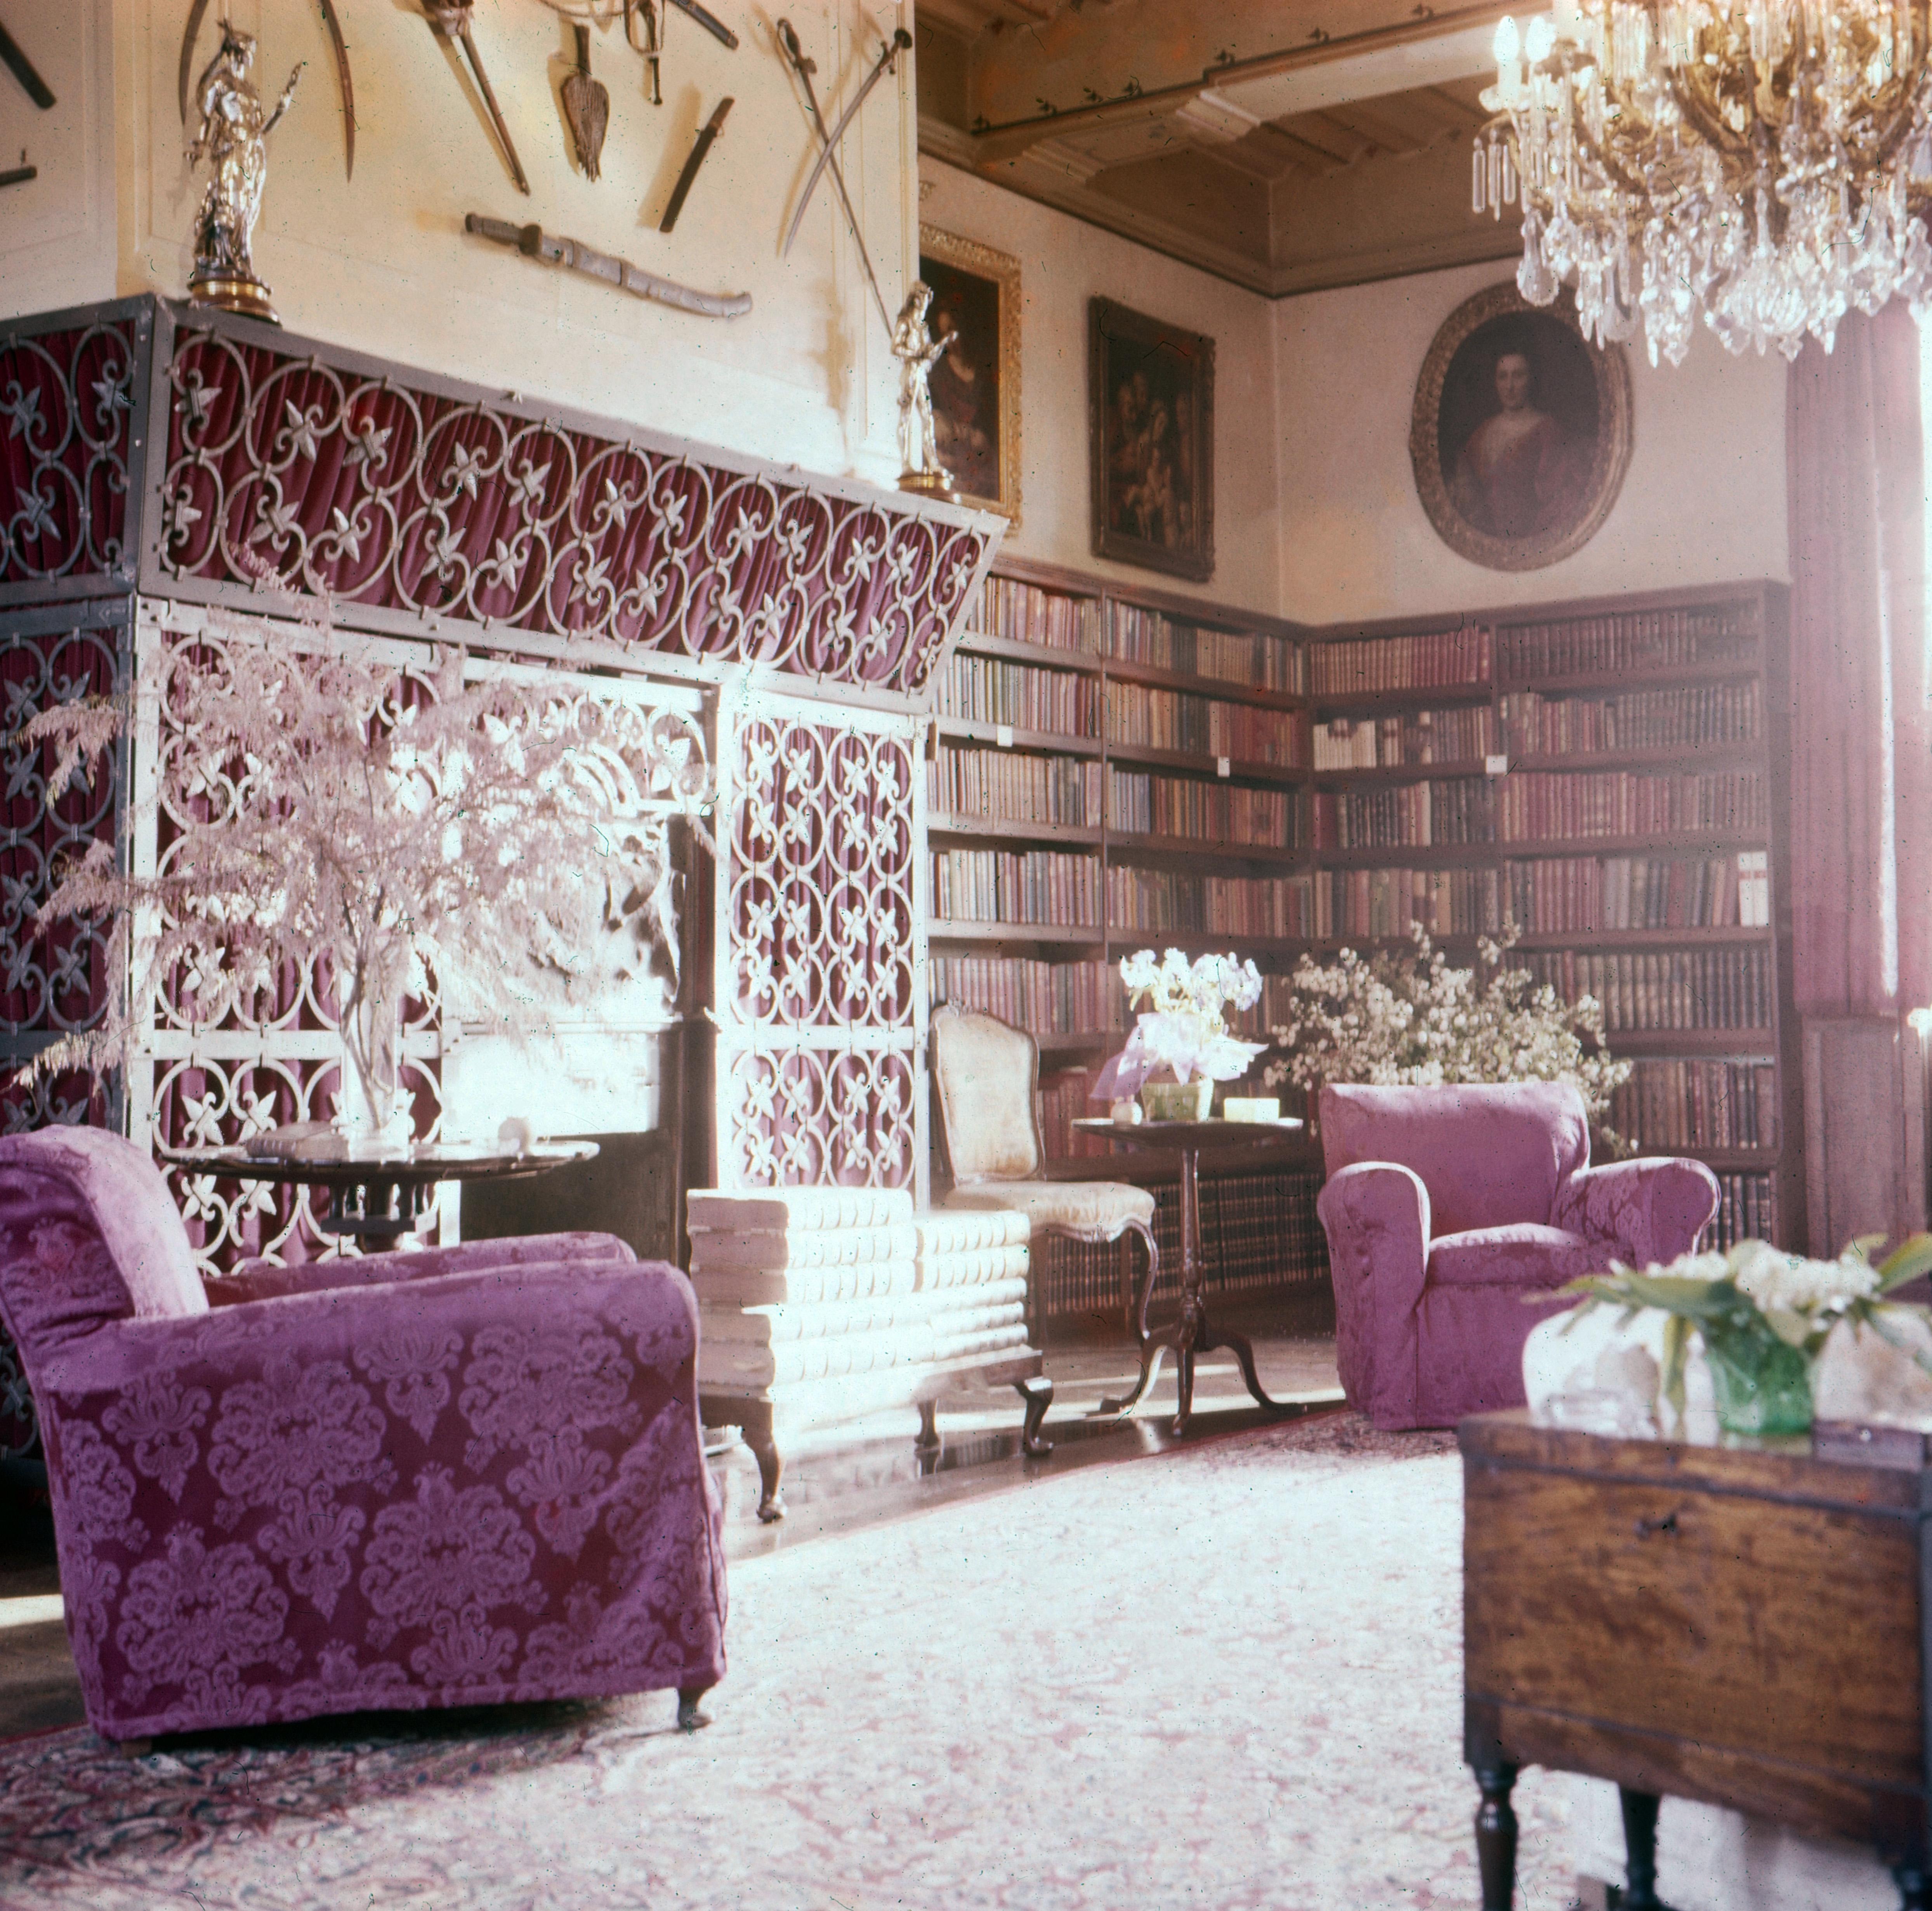 Unknown Landscape Photograph - Noble interior with library in a hotel, USA/Canada 1962.